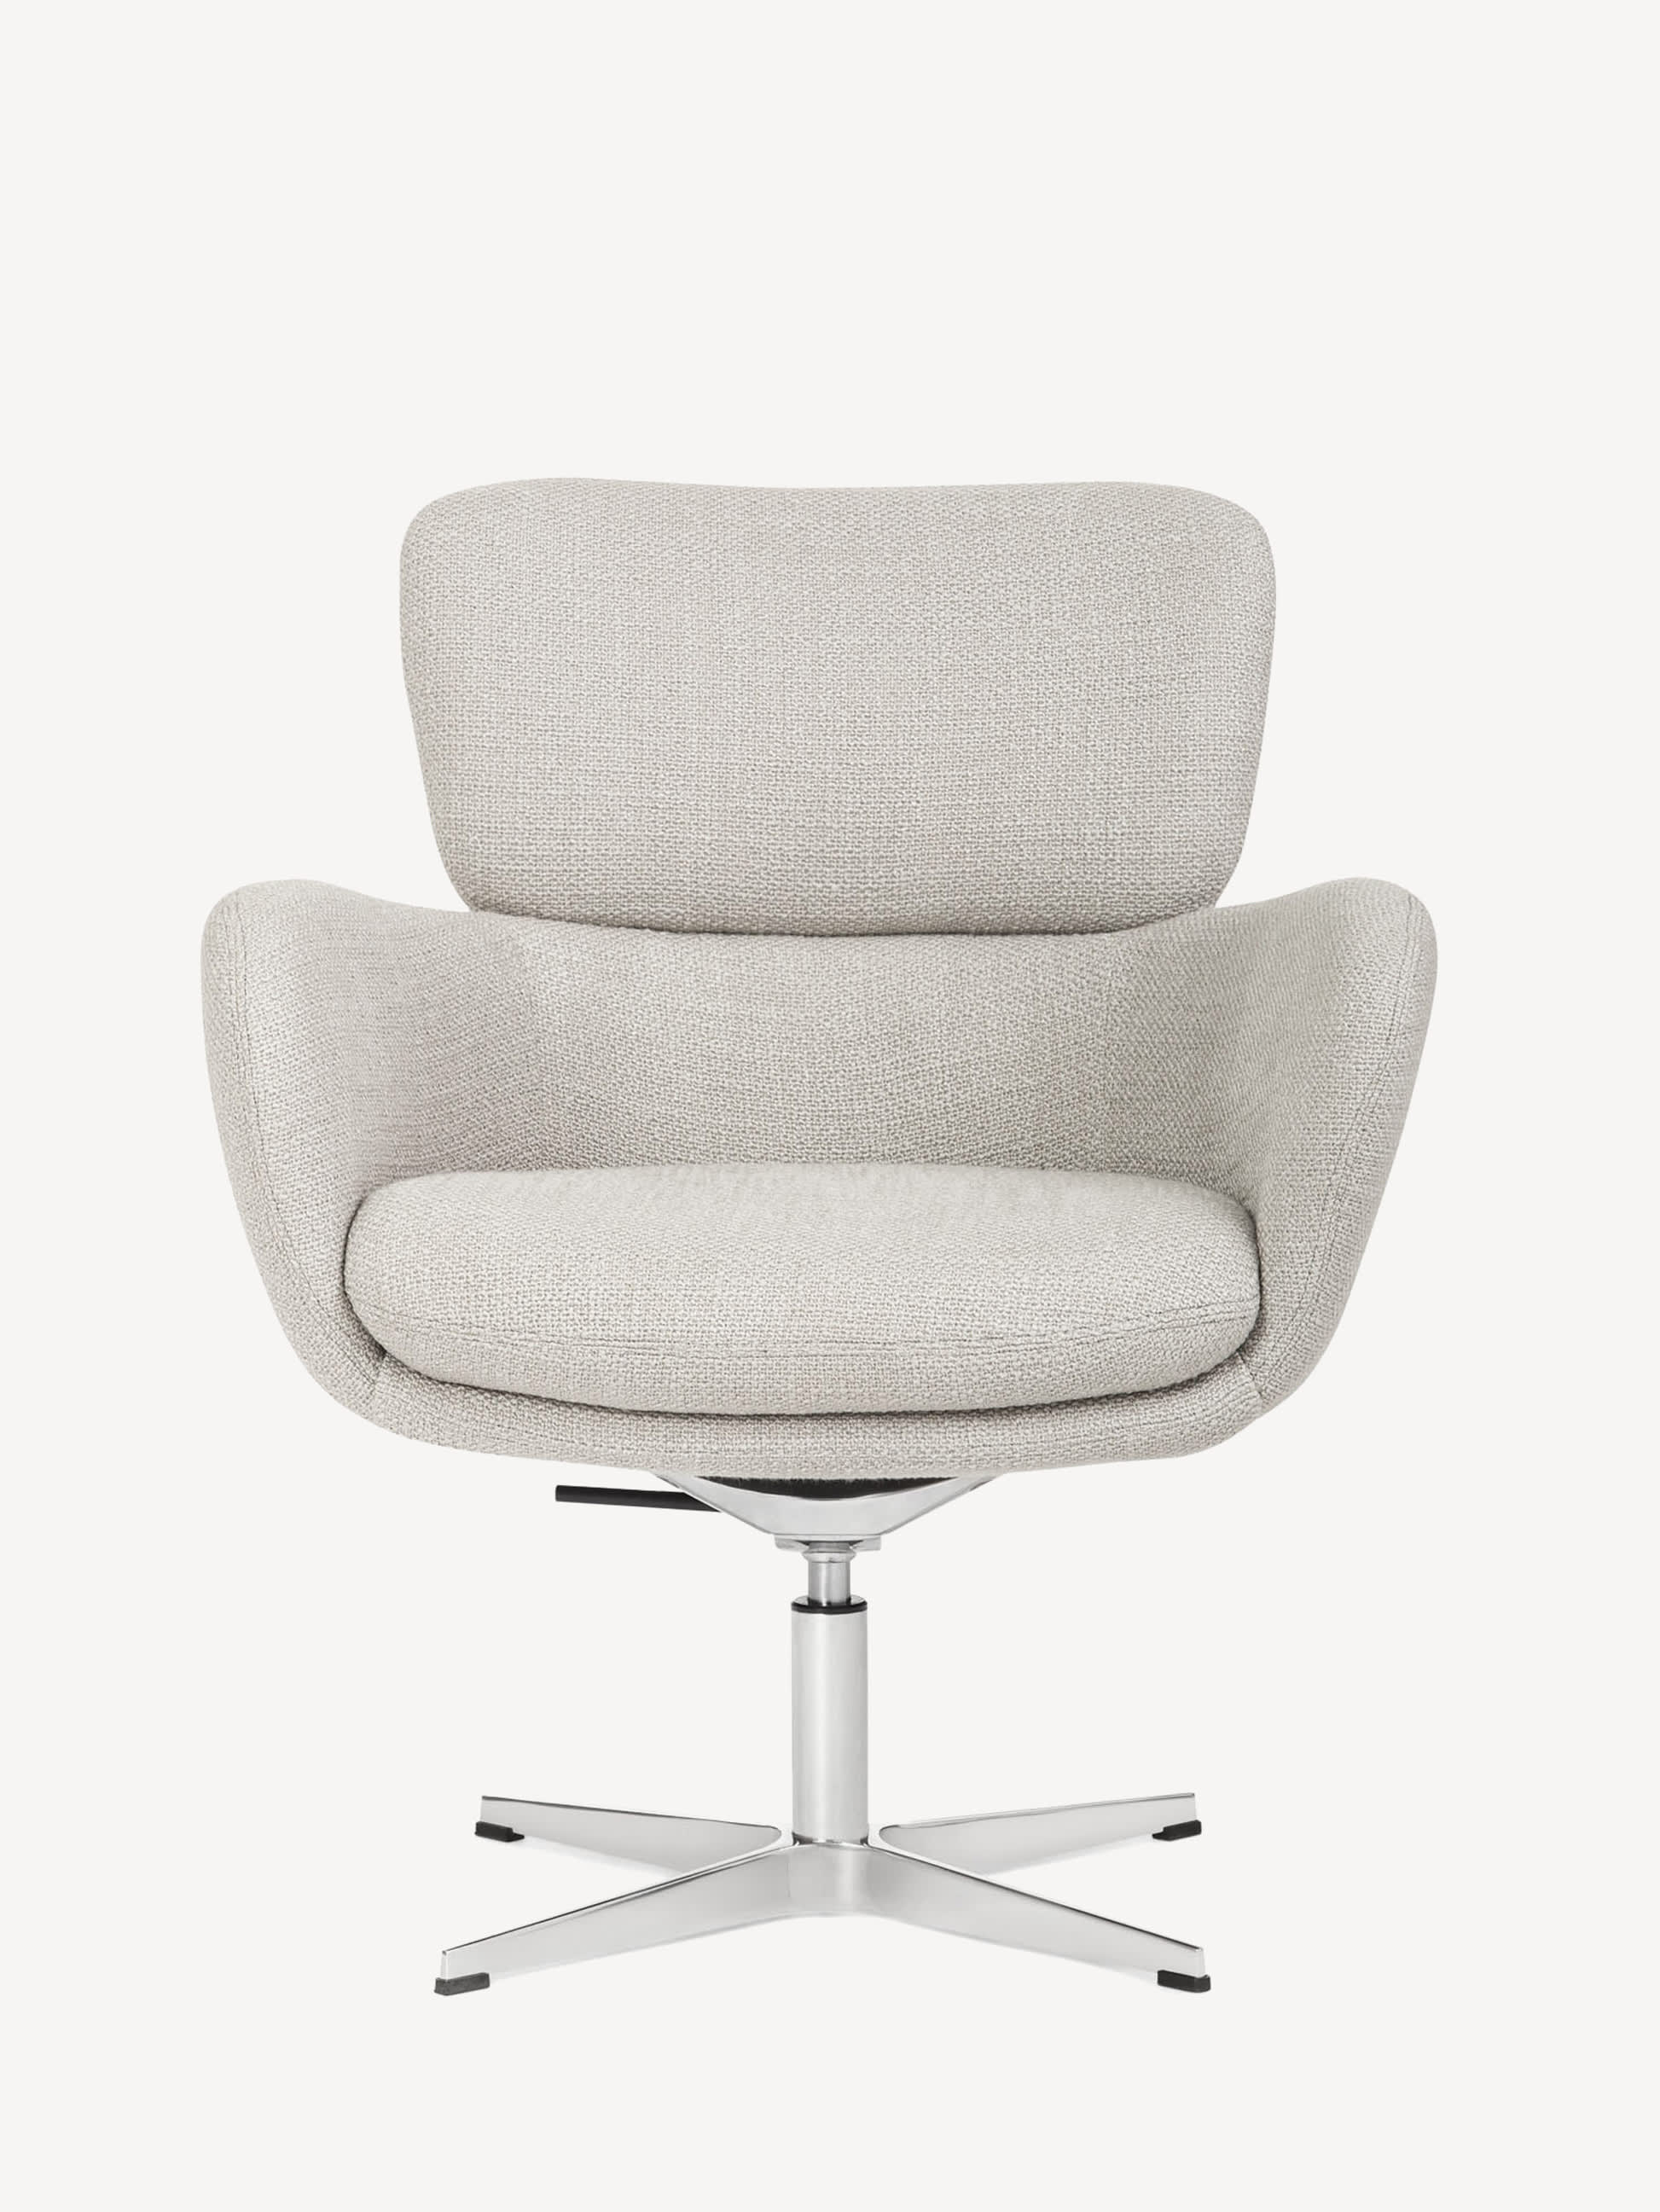 Front view of the height-adjustable Gunlocke Iris lounge chair with aluminum metal base and light grey upholstery.